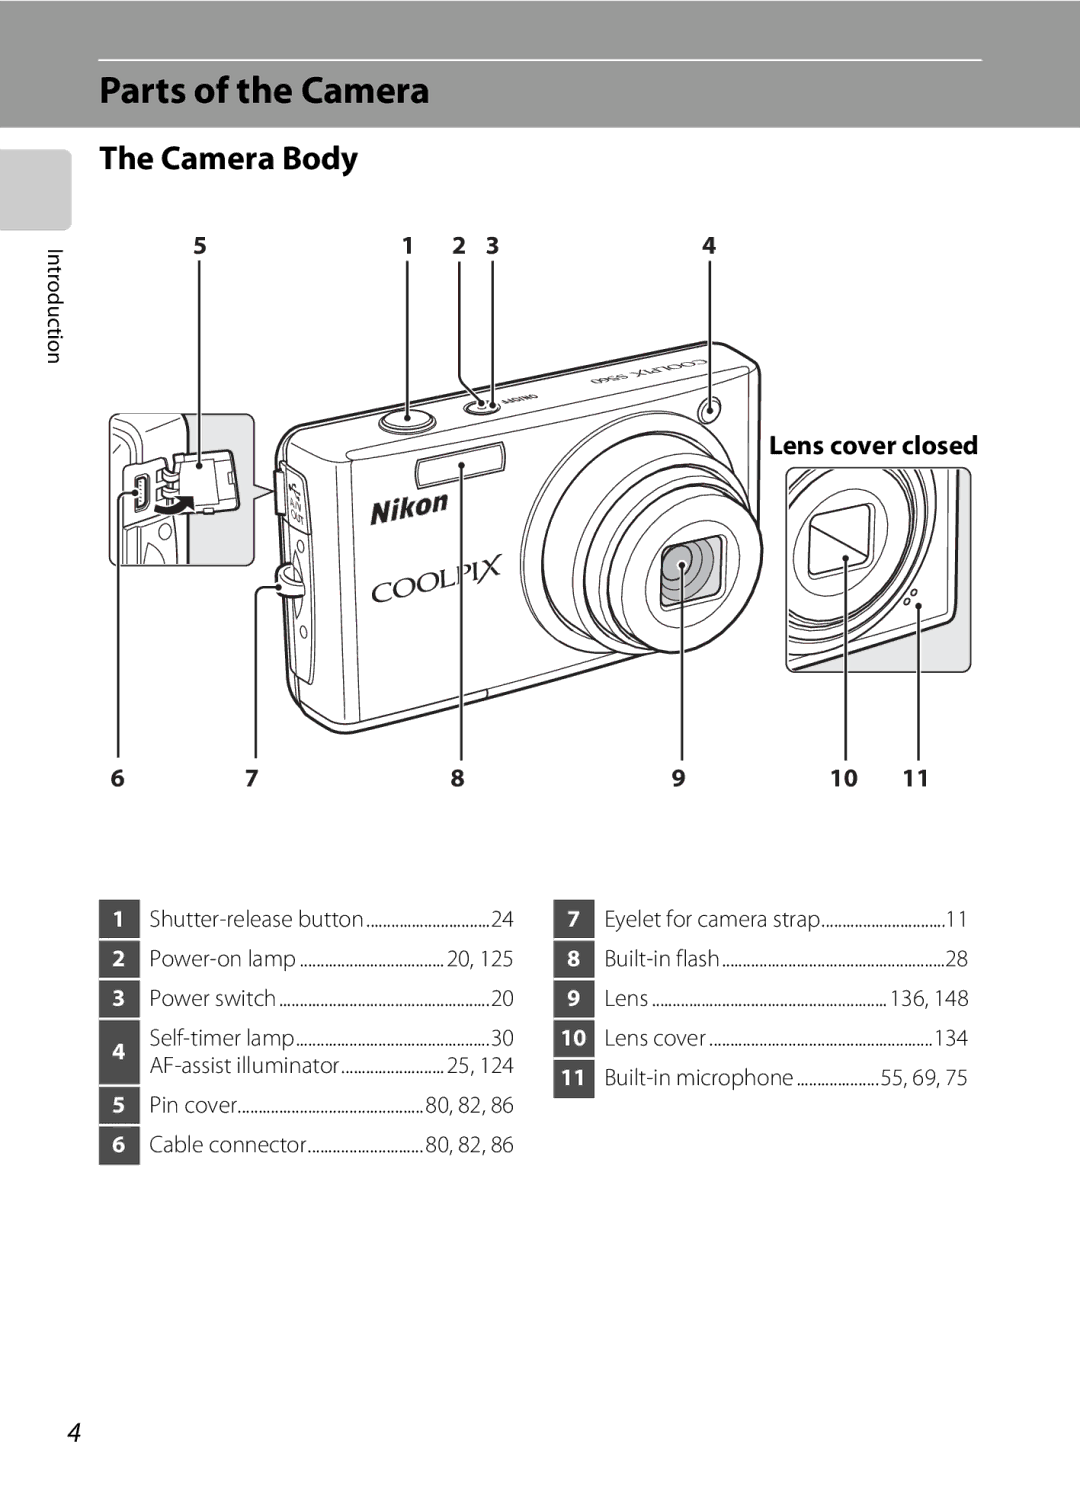 Nortel Networks S560 user manual Parts of the Camera, Camera Body, Lens cover closed 